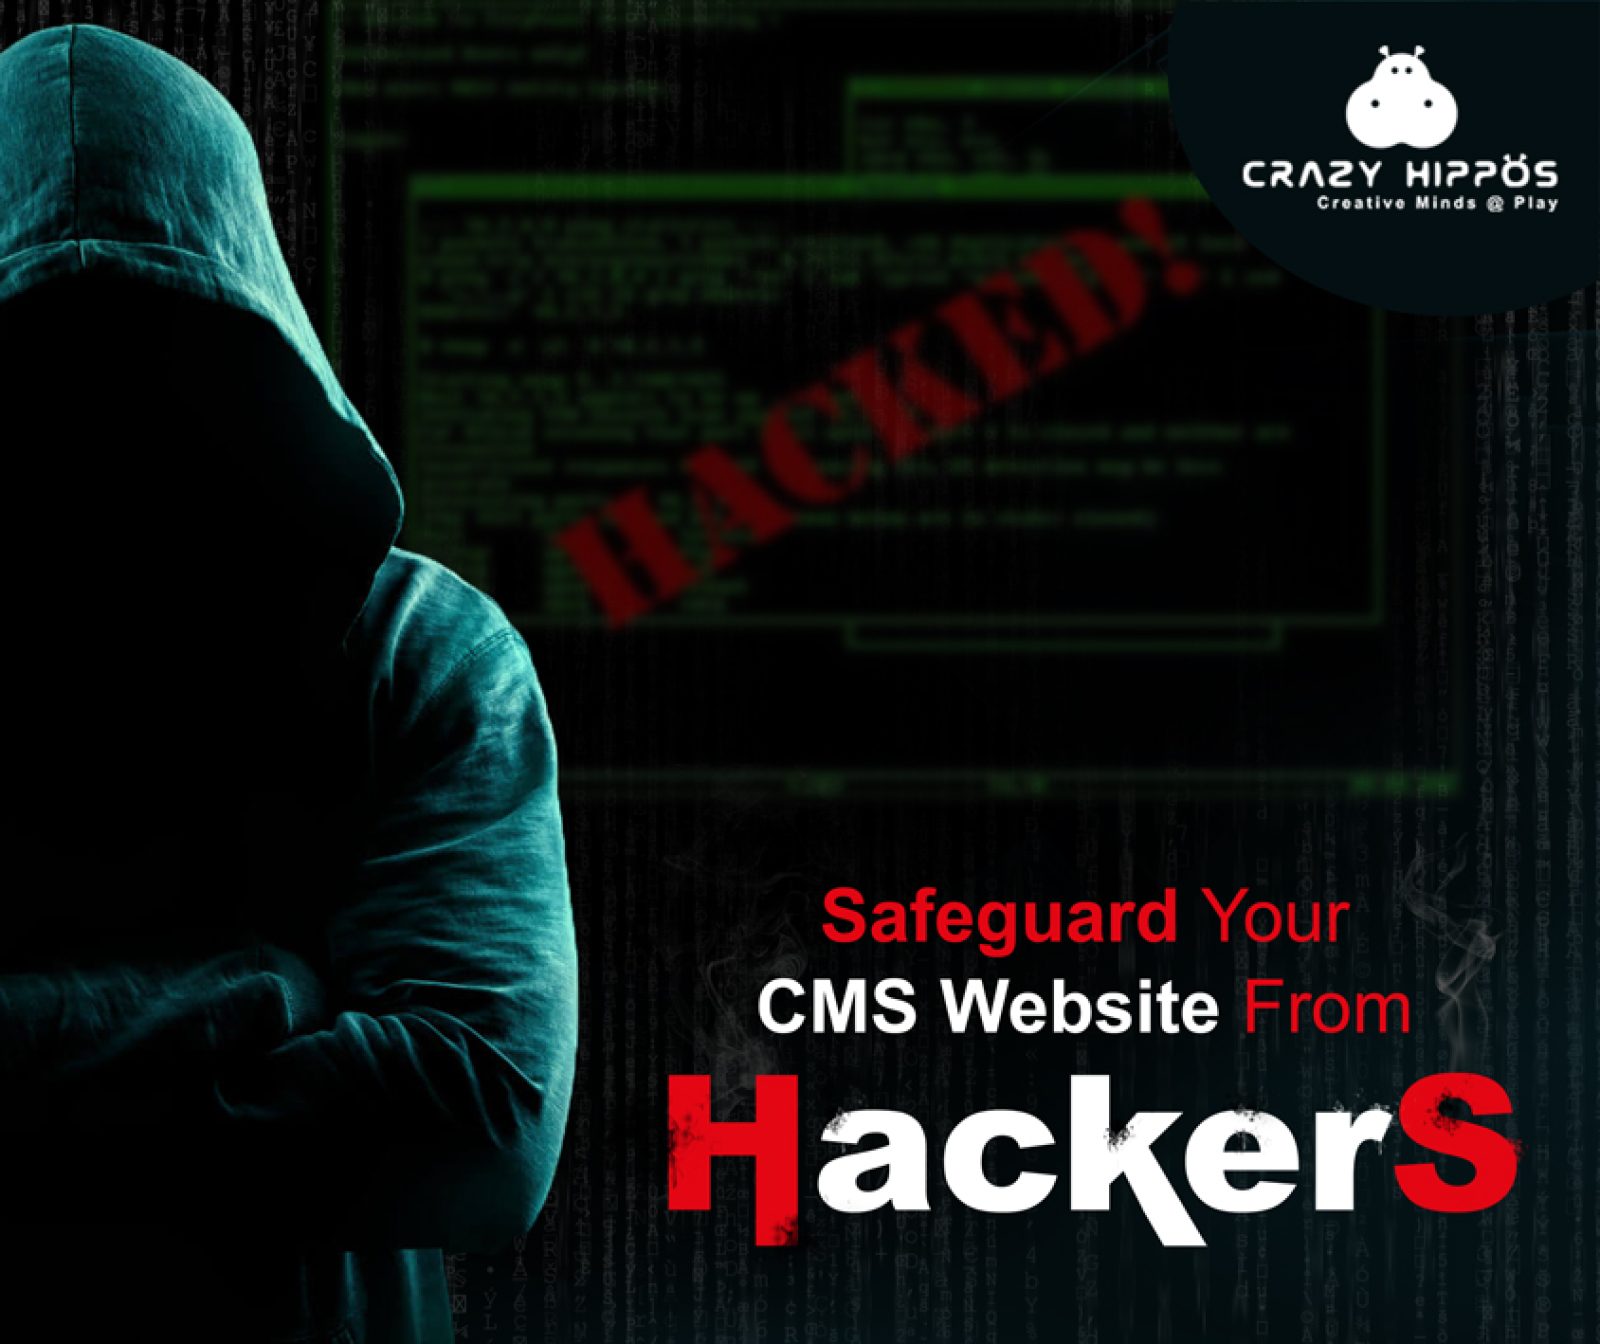 10 SECURITY TIPS TO PROTECT YOUR CMS WEBSITE FROM HACKERS